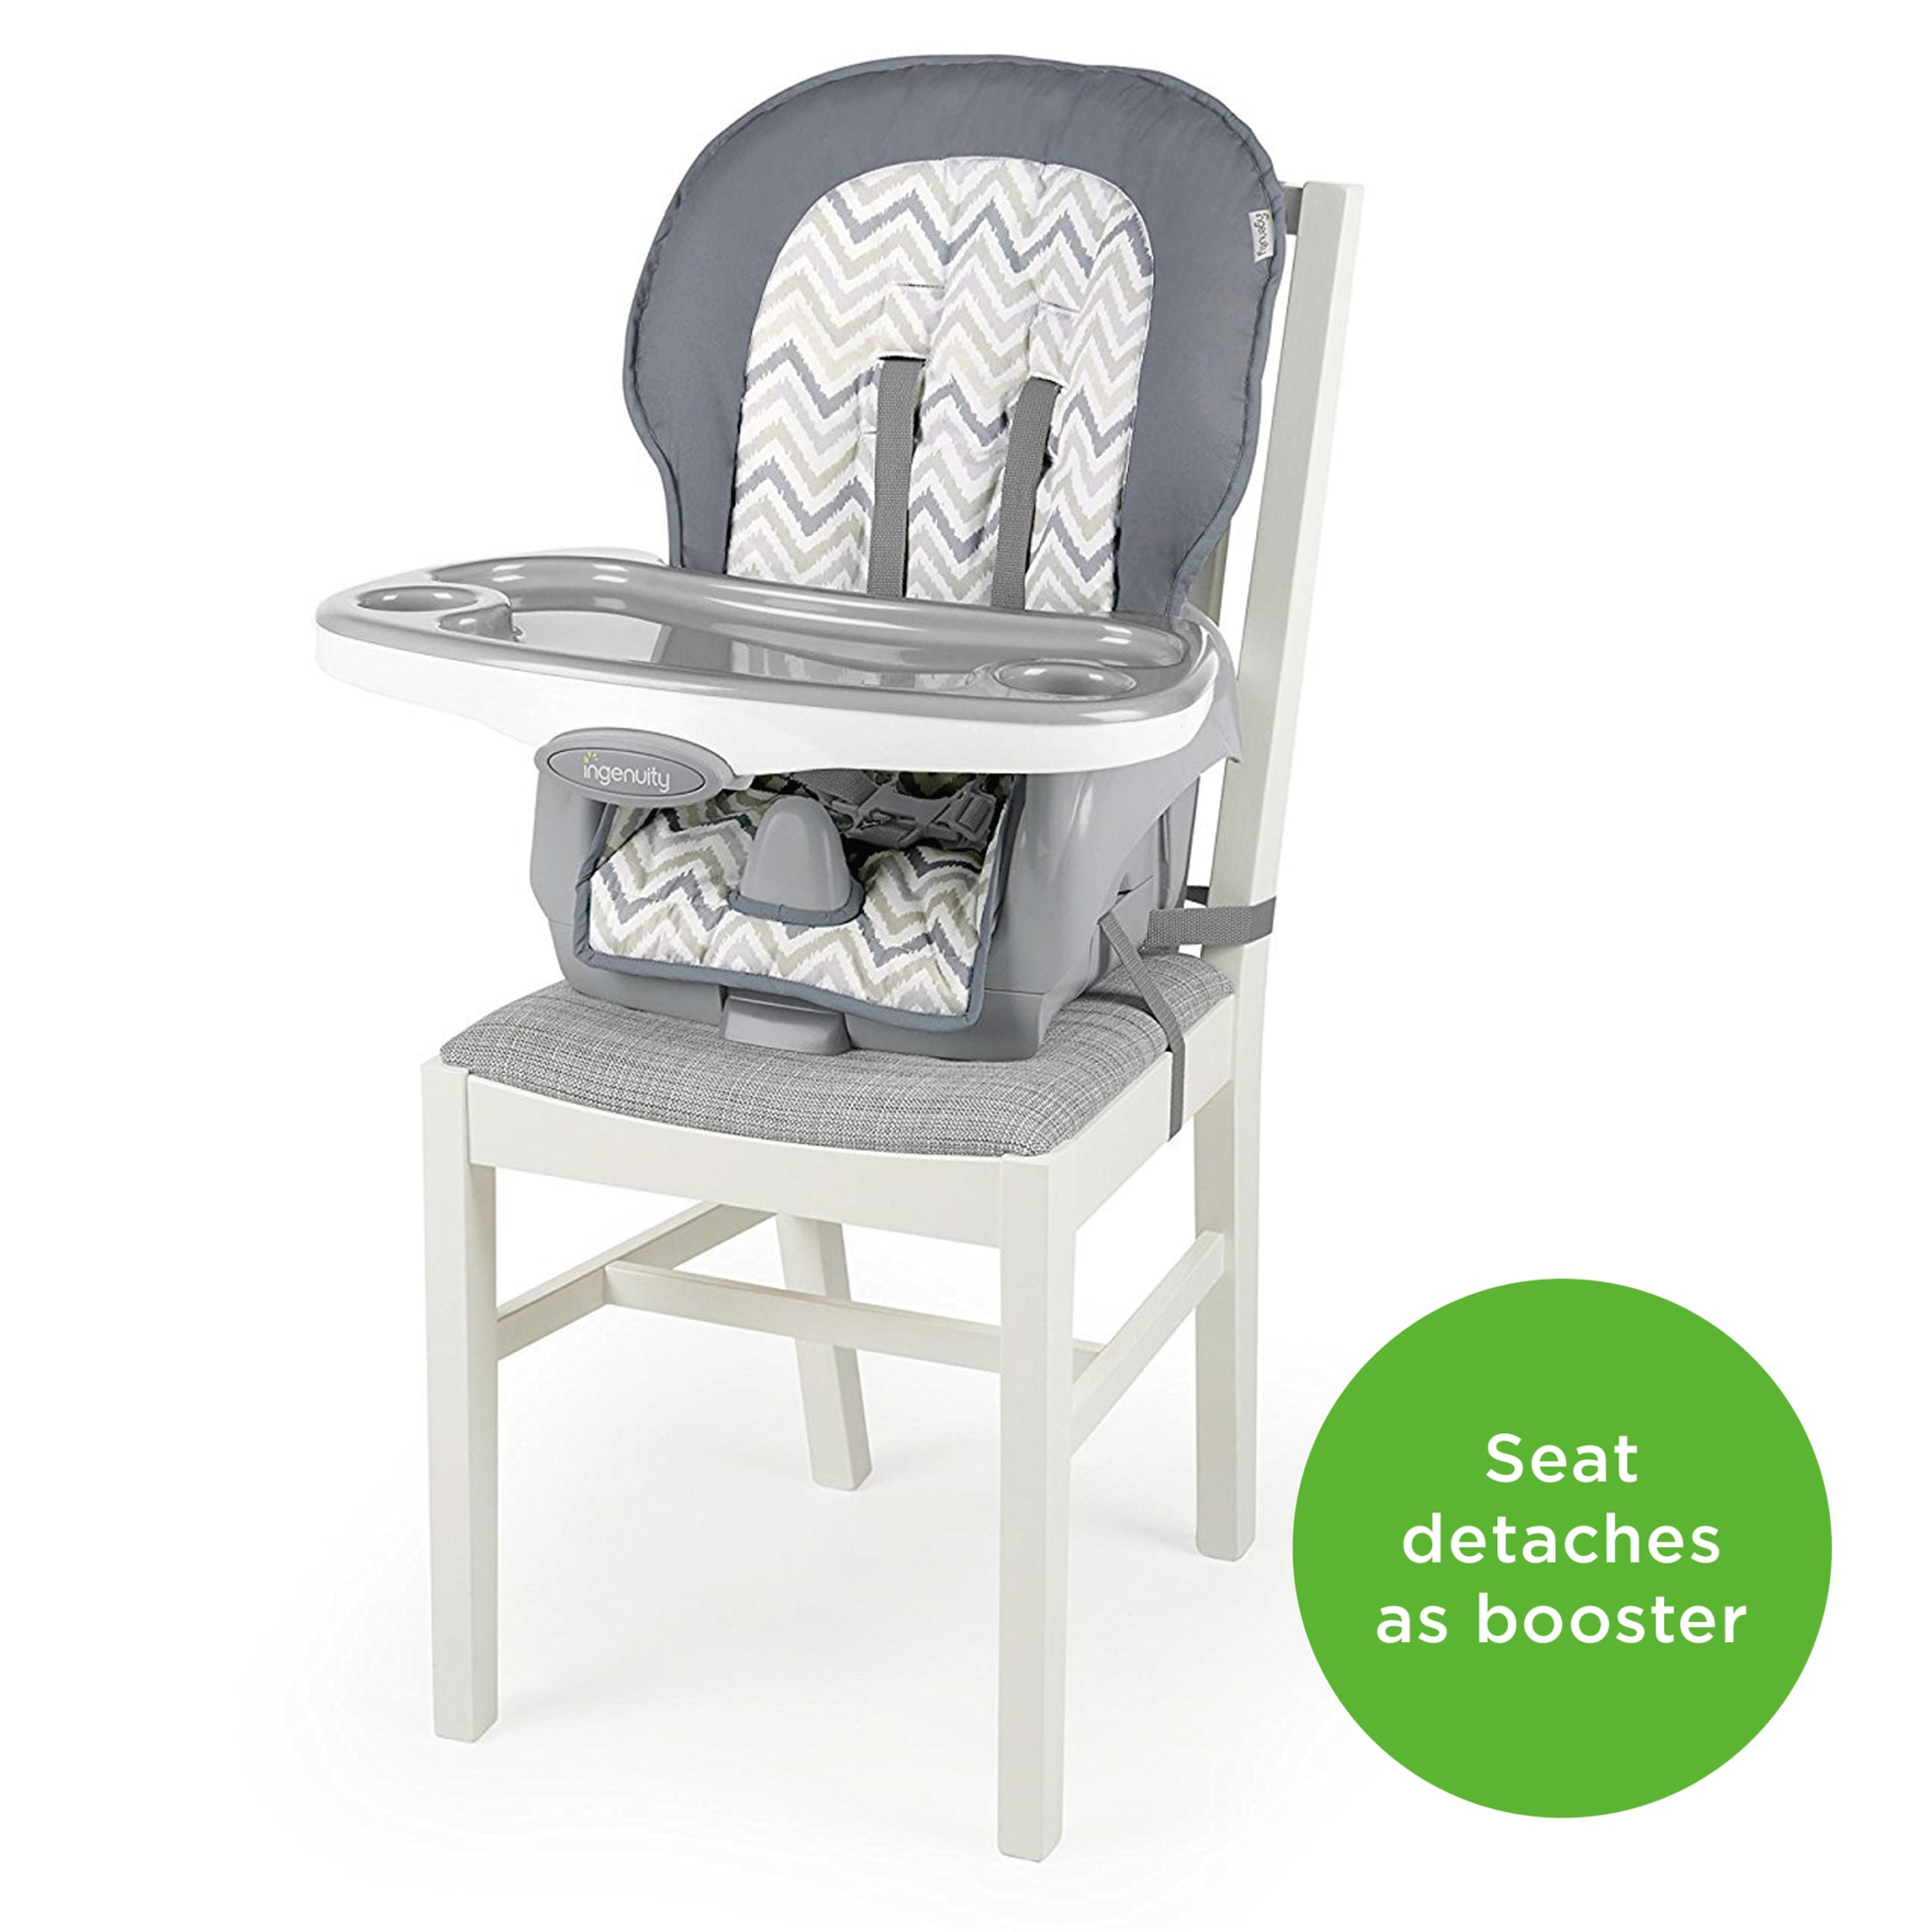 Ingenuity Trio Elite 3-in-1 High Chair, Toddler Chair, and Booster, For Ages 6 Months and Up, Unisex - Braden - image 5 of 13